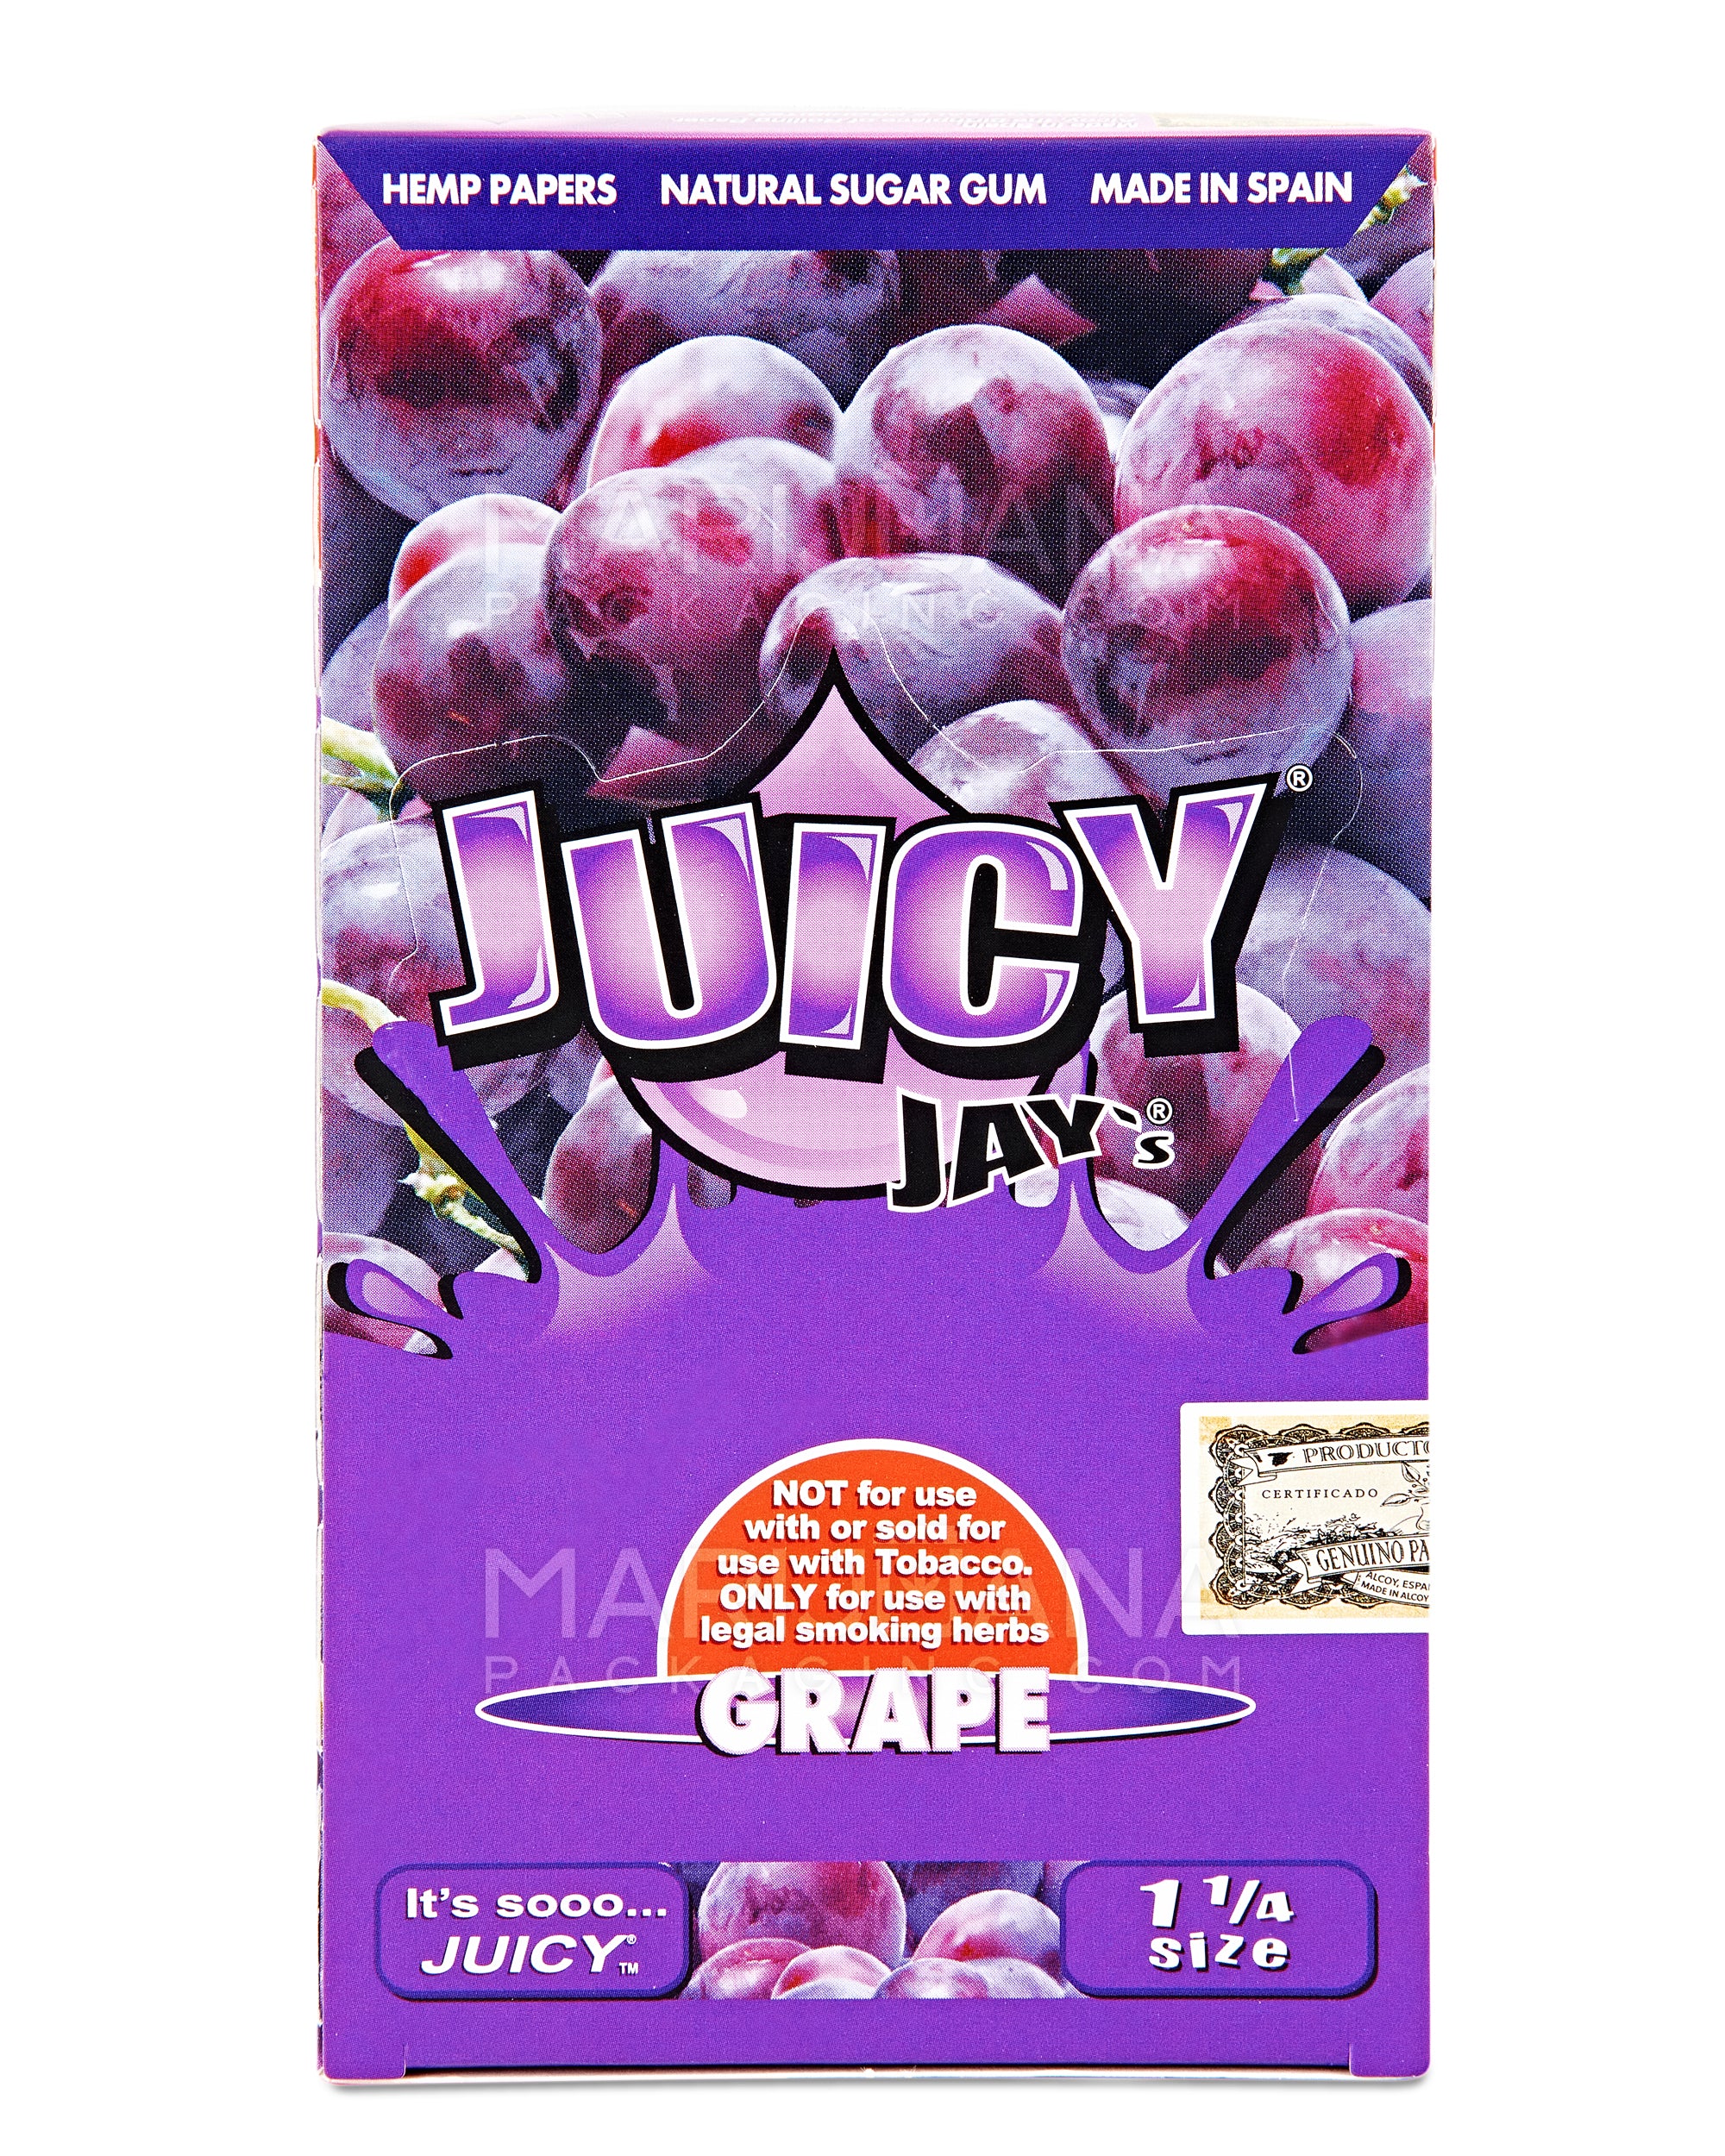 JUICY JAY'S | 'Retail Display' 1 1/4 Size Hemp Rolling Papers | 76mm - Grape - 24 Count - 4